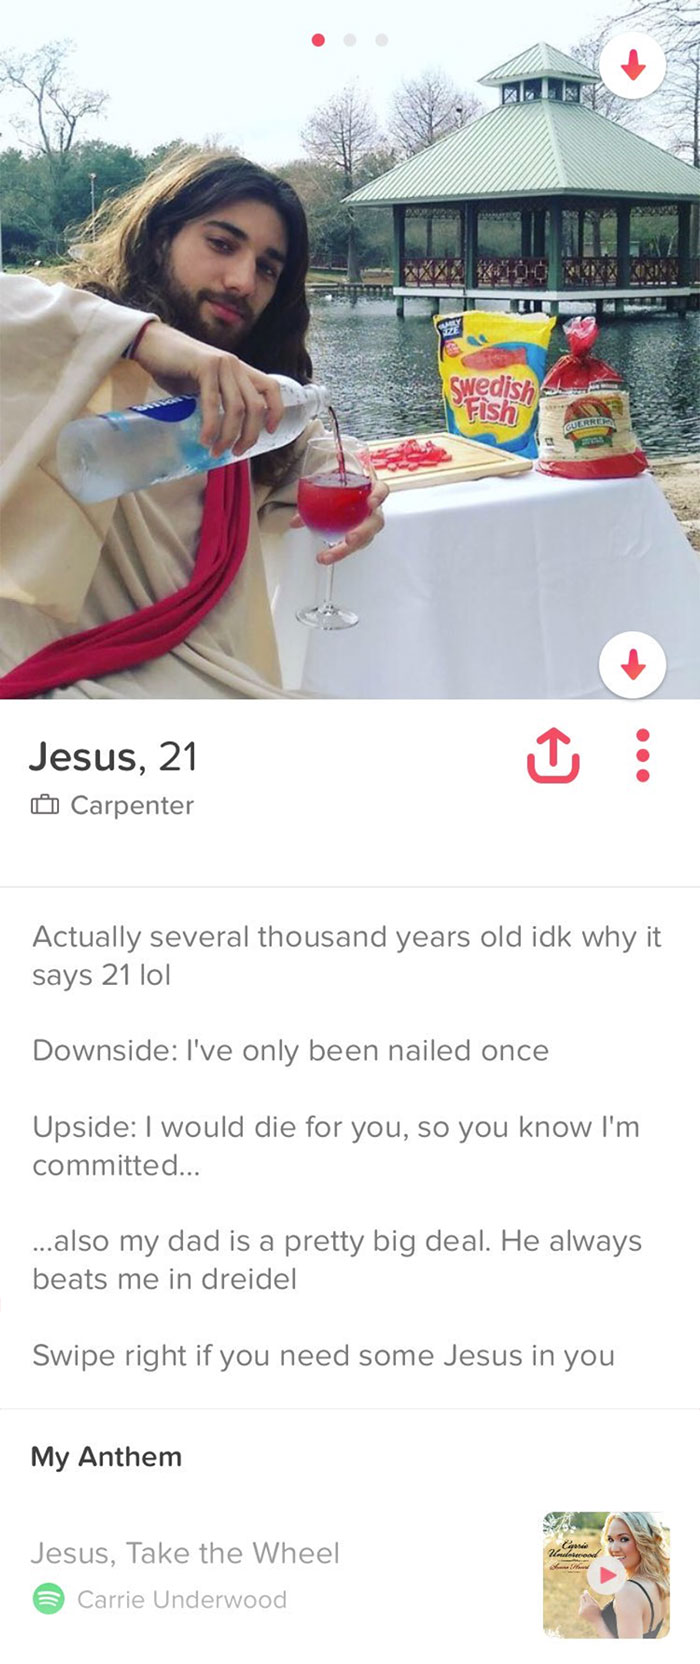 158 Funny Tinder Profiles That Will Make You Look Twice | Bored Panda